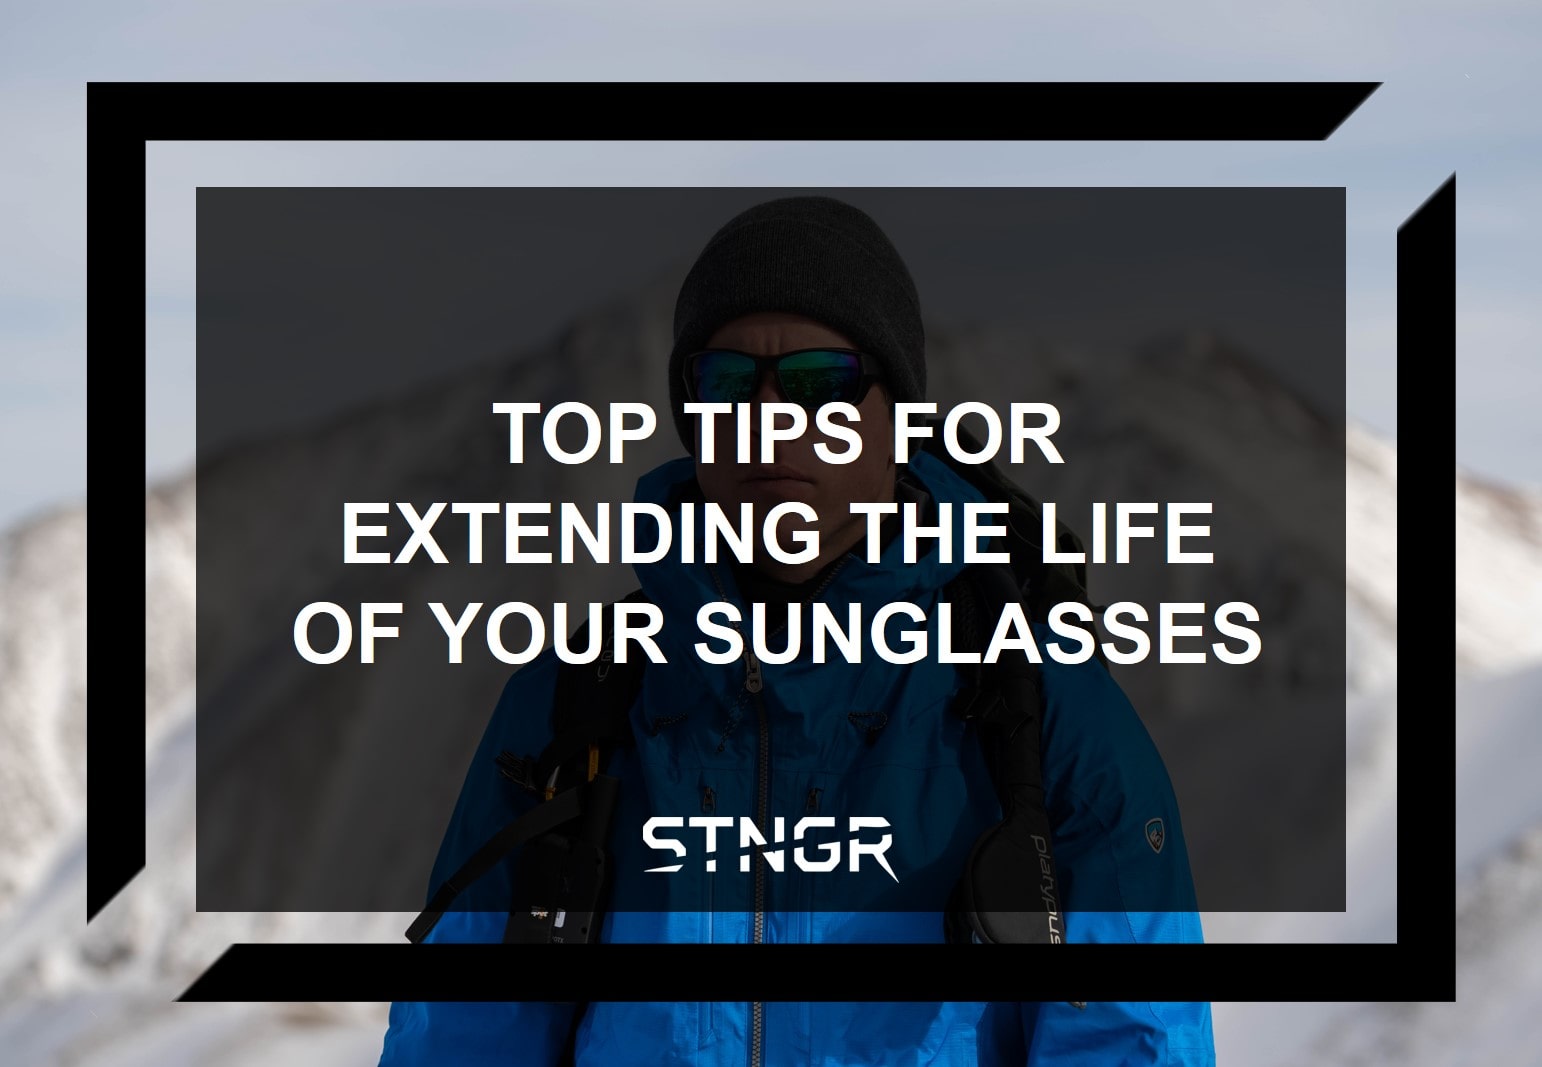 Top Tips for Extending the Life of Your Sunglasses